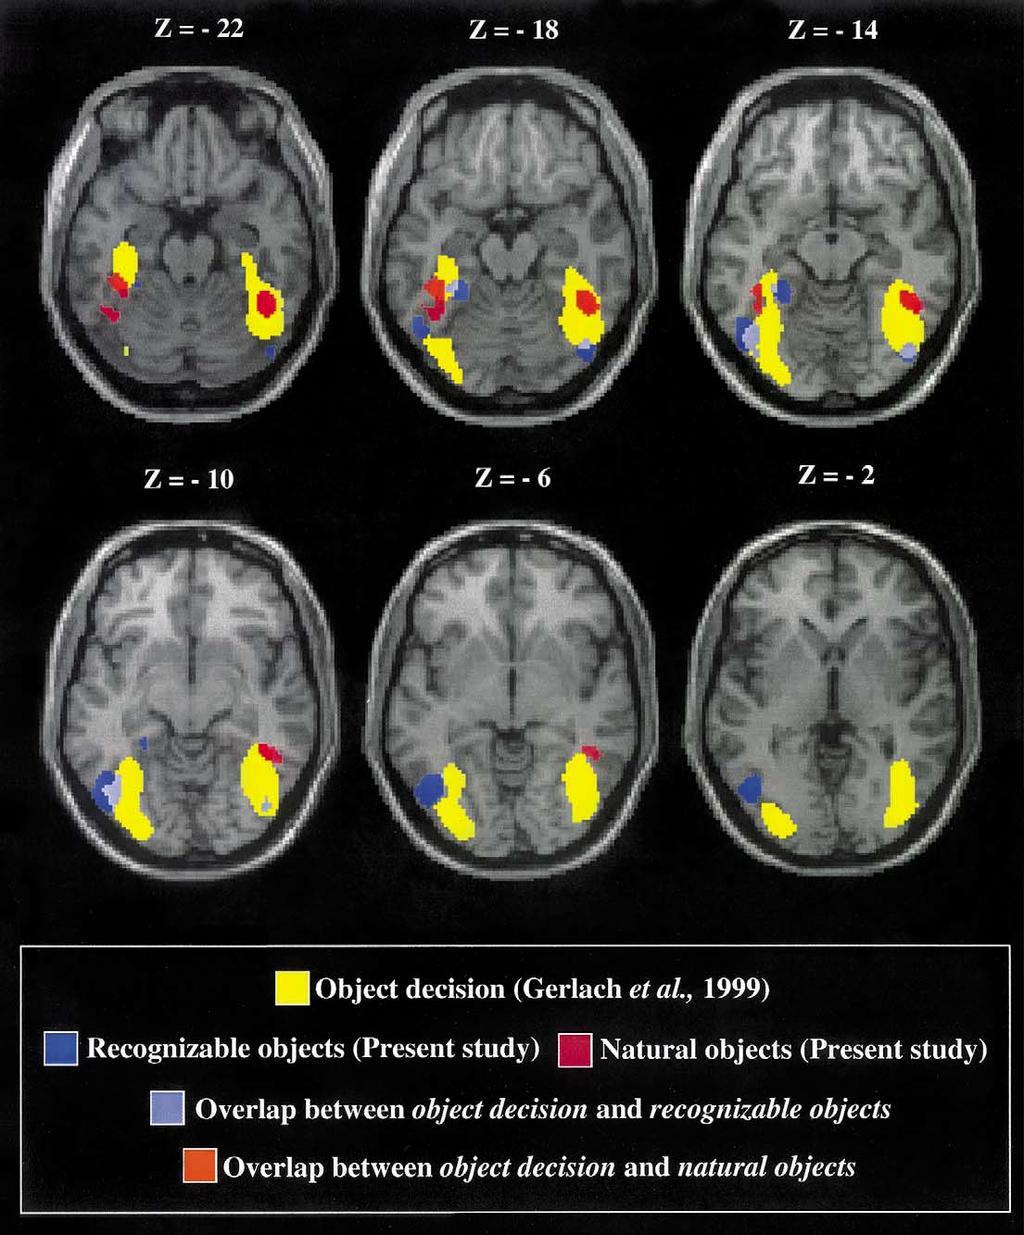 C. Gerlach et al. / Neuropsychologia 40 (2002) 1254 1267 1263 Fig. 4. Six horizontal sections showing the areas associated with: object decision vs.